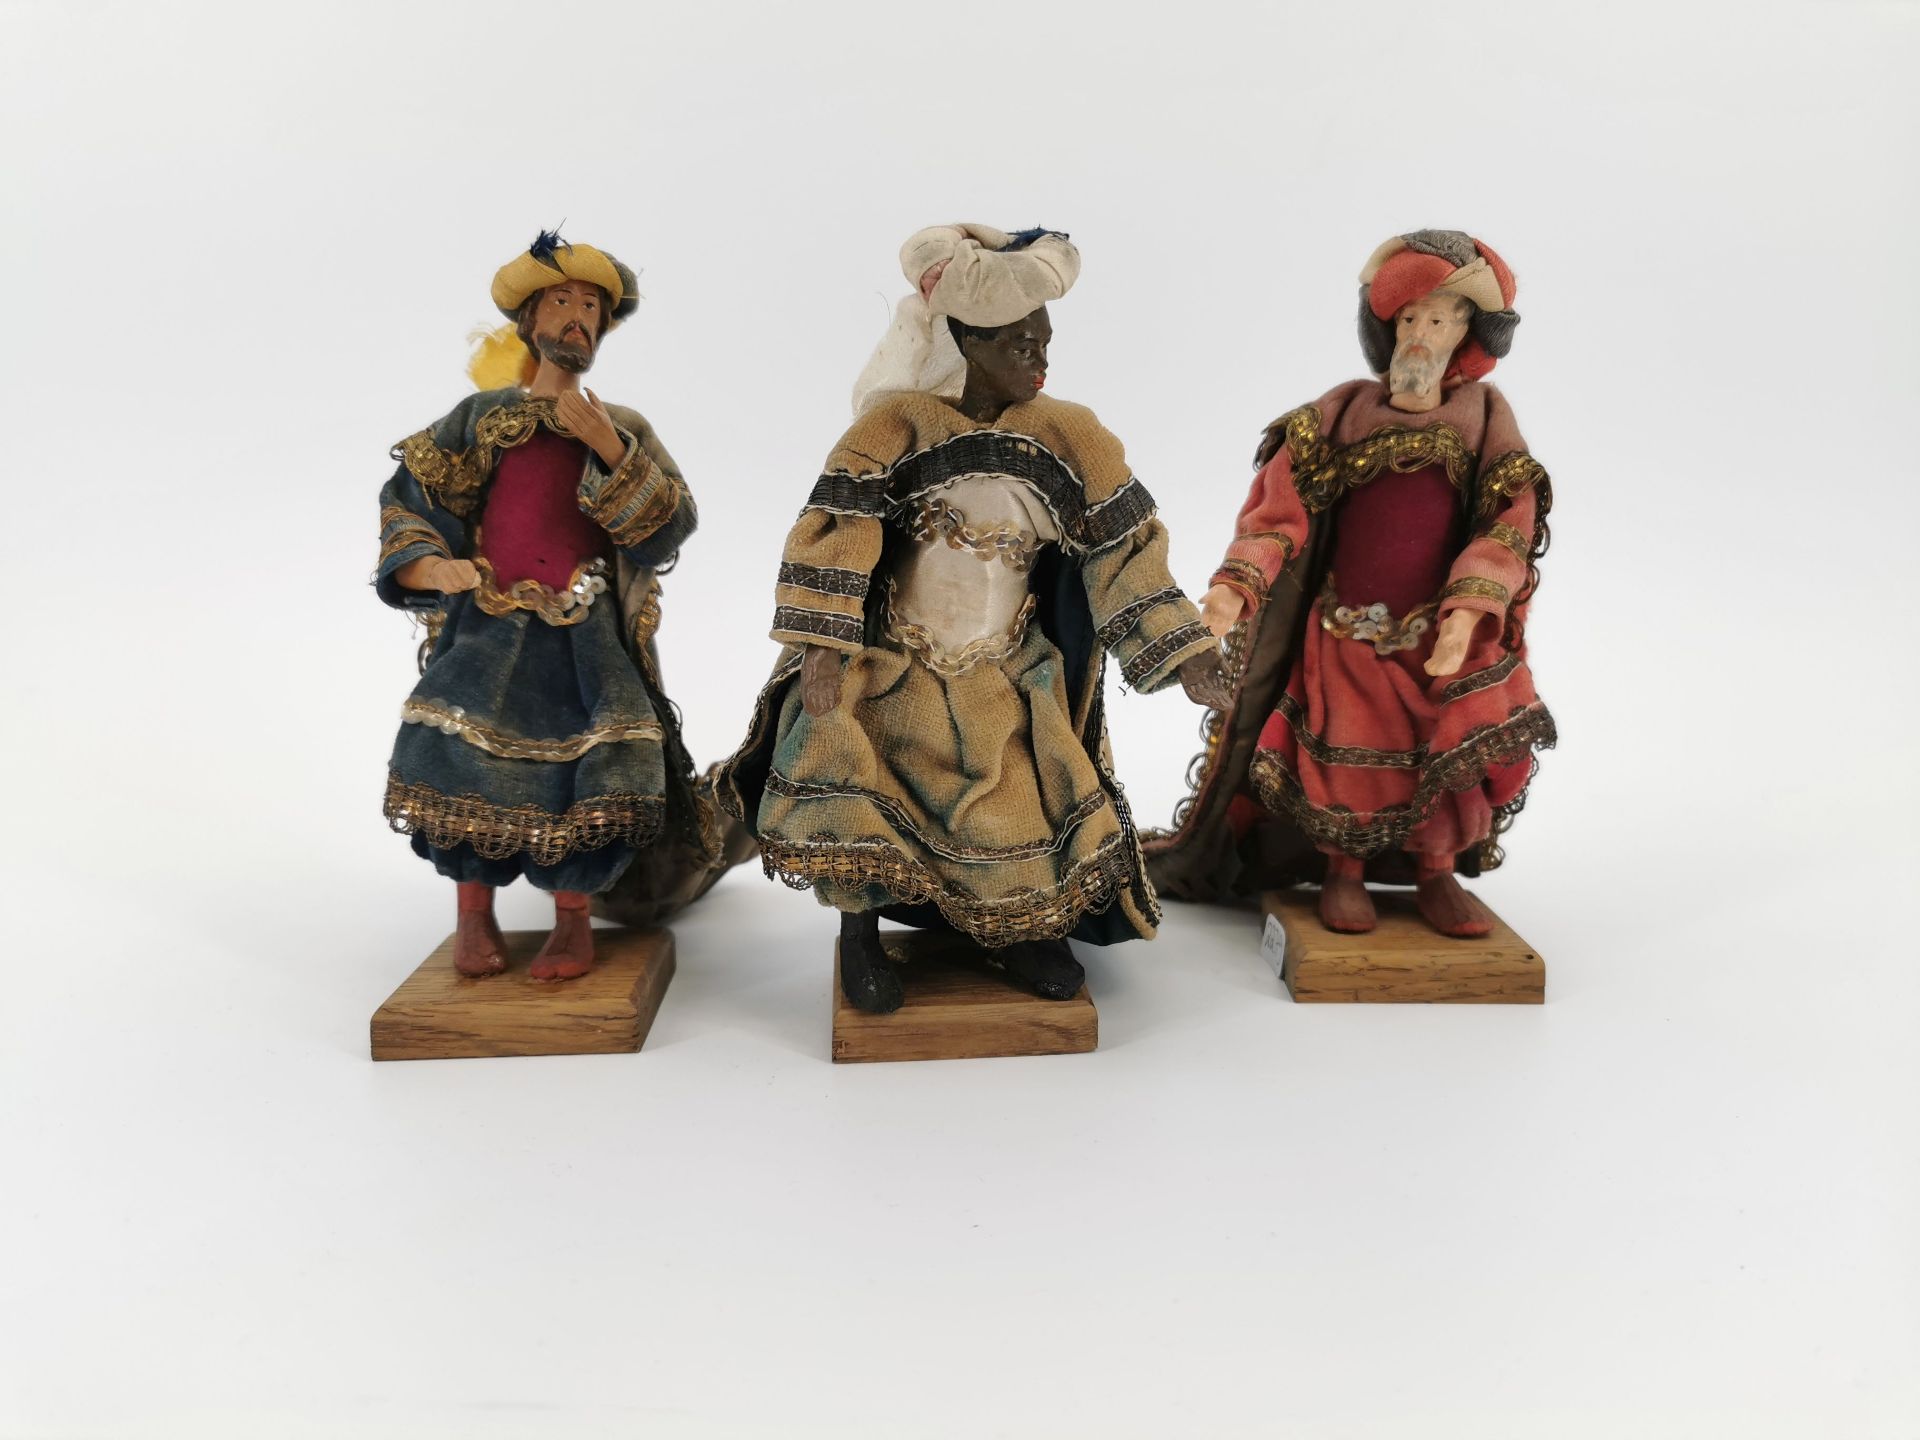 FIGURES OF THE HOLY THREE KINGS IN THE STYLE OF NEAPOLITAN NATIVITY FIGURES